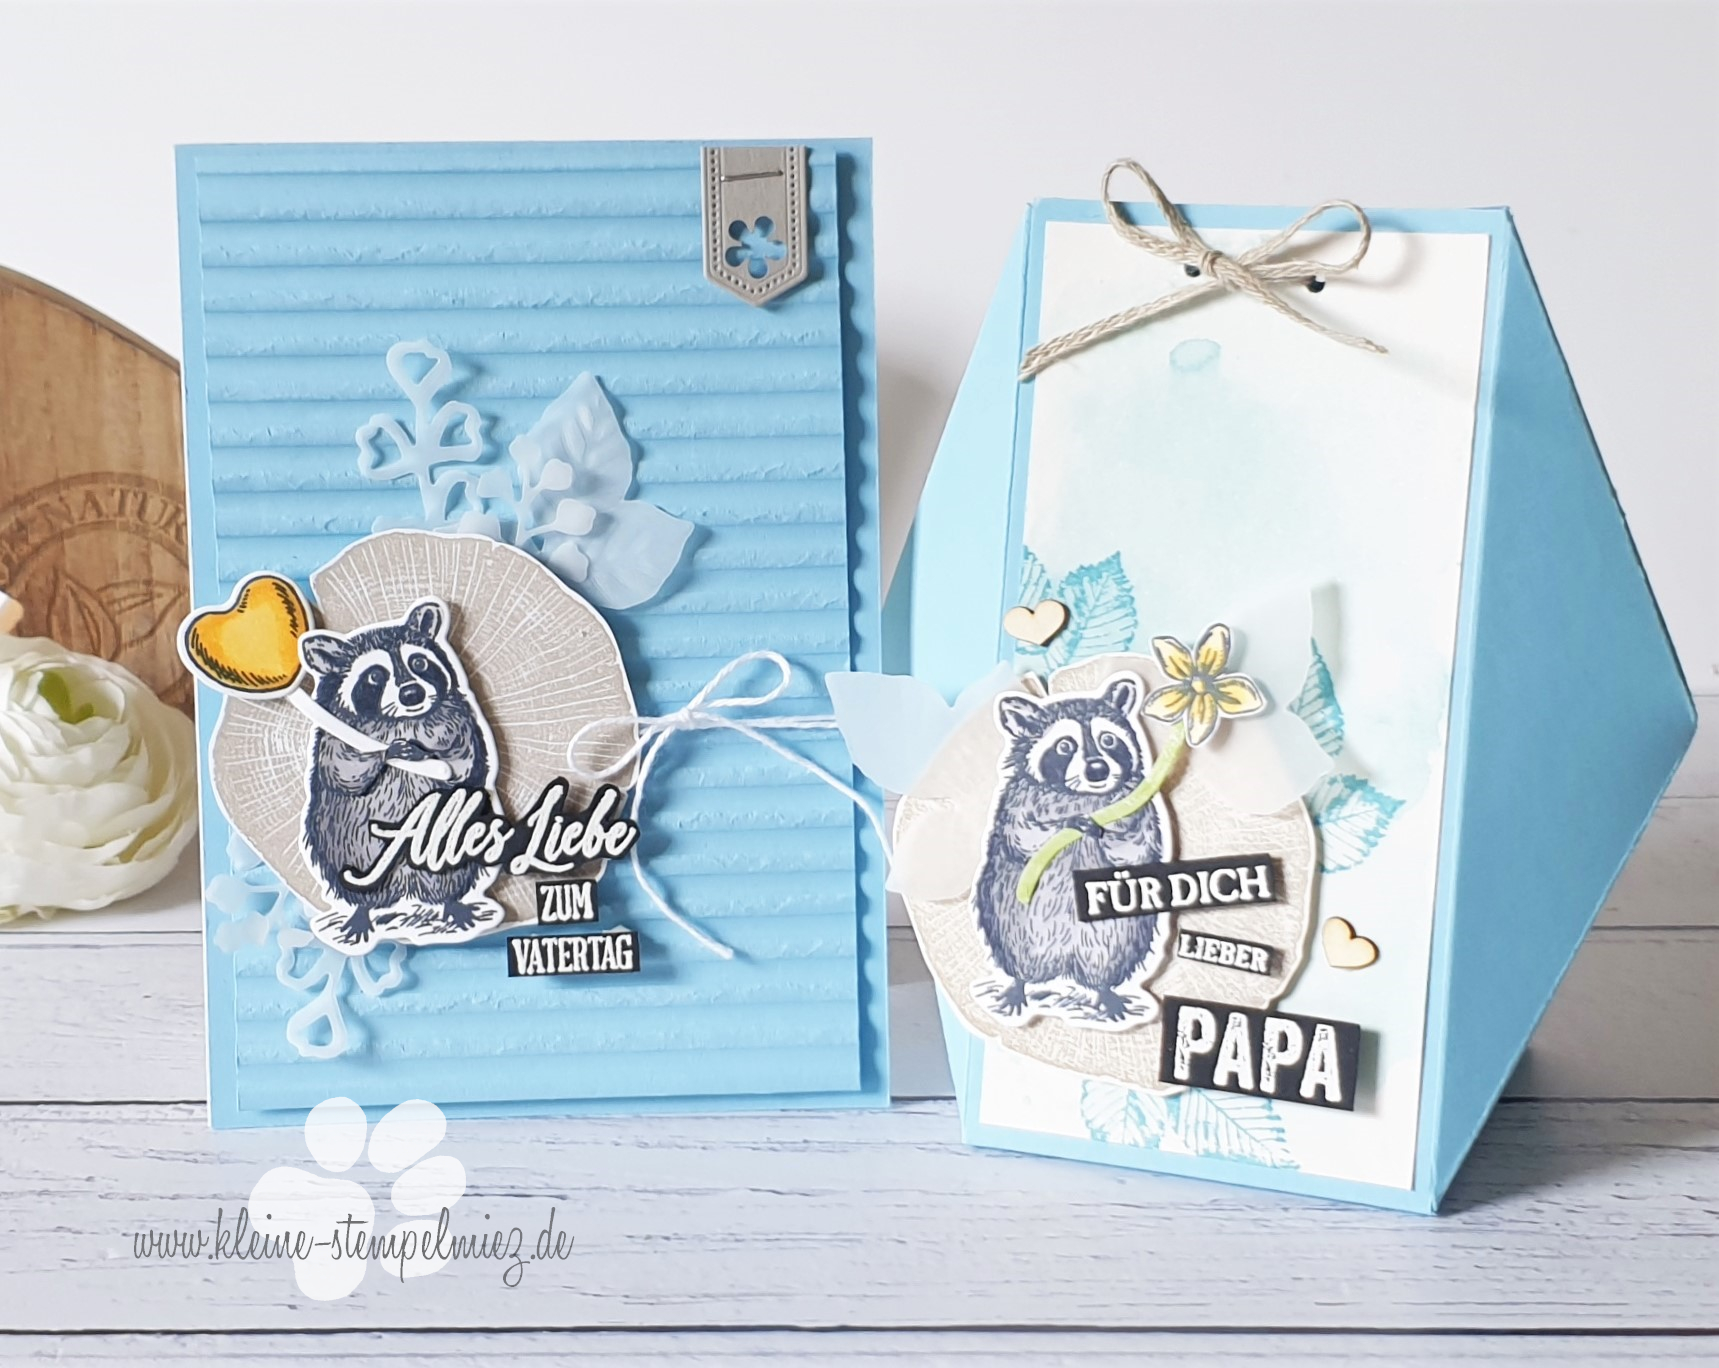 Stampin’ Friends Blog Hop – Masculine or My Guy